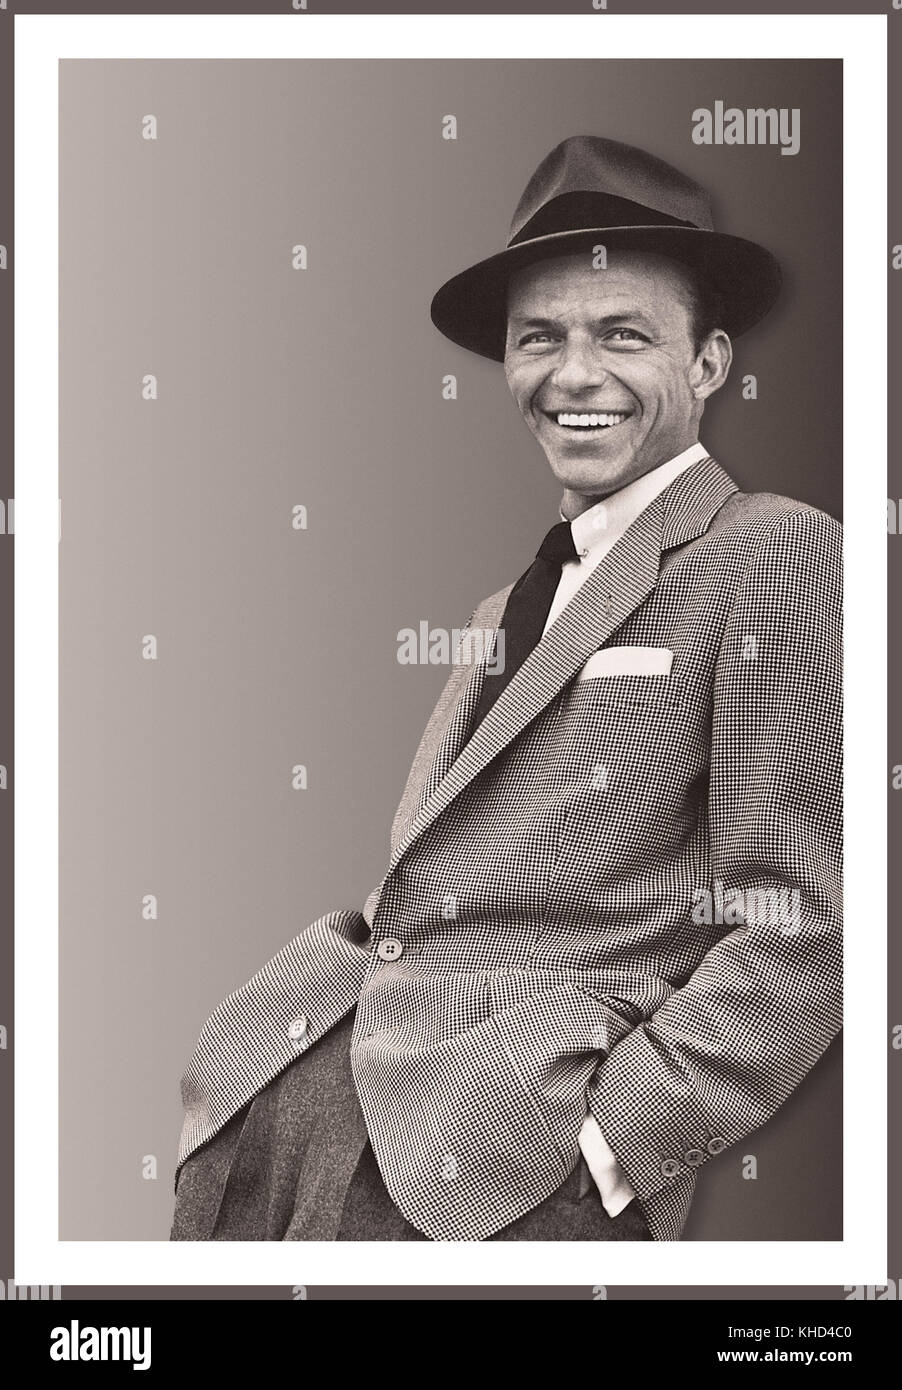 FRANK SINATRA INFORMAL PORTRAIT 1950's toned RGB black & white Francis Albert Sinatra December 12, 1915 – May 14, 1998 was an American singer, actor, and producer who was one of the most popular and influential musical artists of the 20th century. He is one of the best-selling music artists of all time, having sold more than 150 million records worldwide. Born in Hoboken, New Jersey, to Italian immigrants, Sinatra began his musical career in the swing era with bandleaders Harry James and Tommy Dorsey. Stock Photo